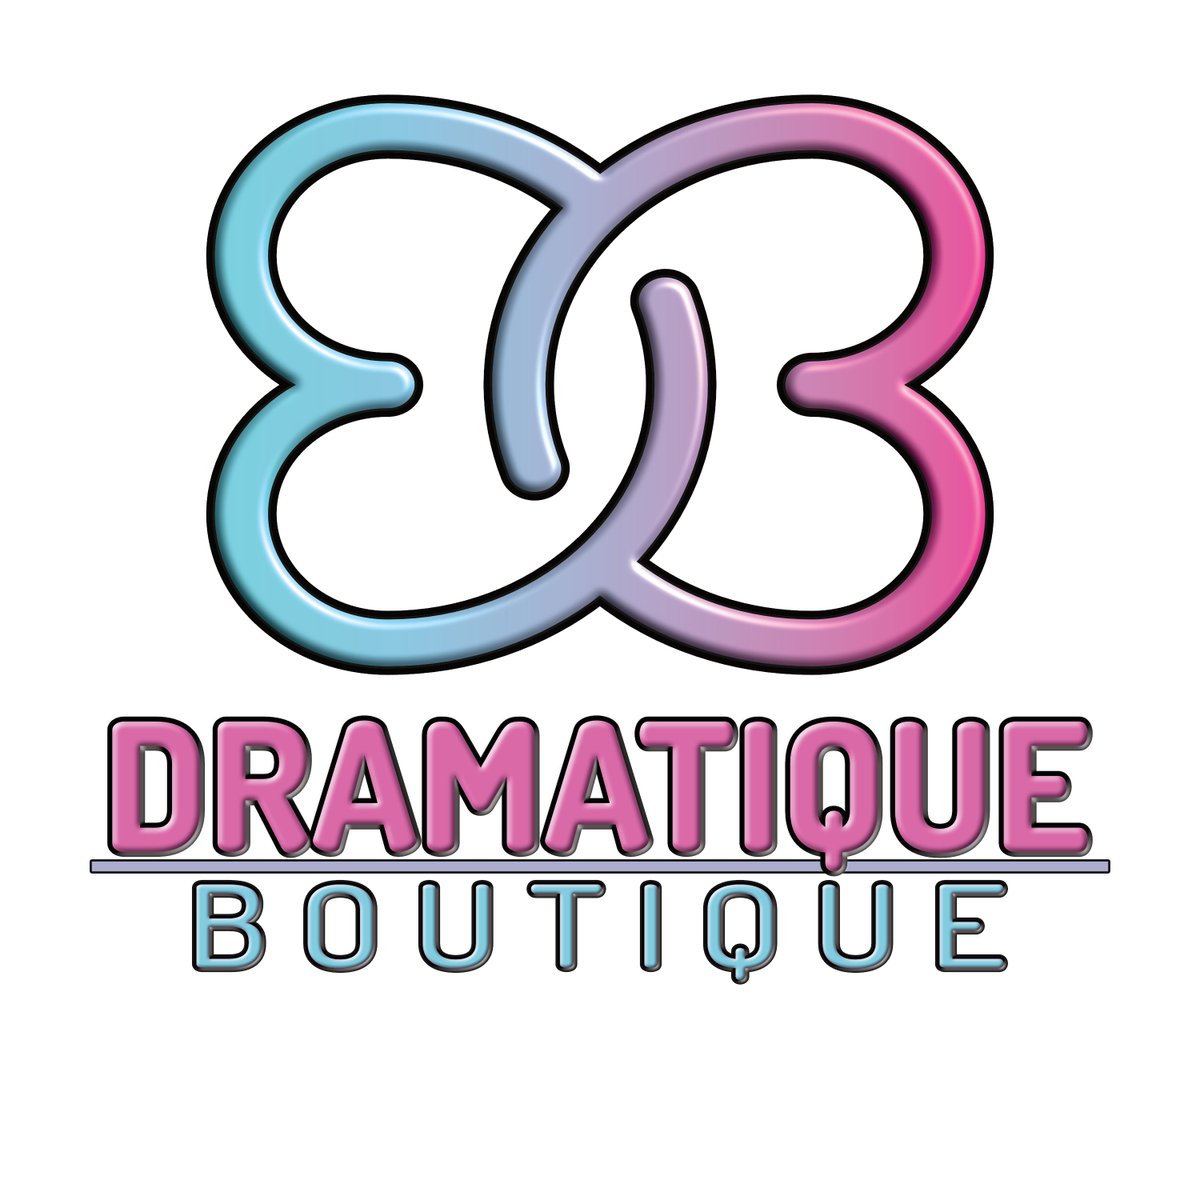 Dramatique boutique was actually in the works for over a year. This was the original logo concept i came up with. The reason its a boutique is actually because i originally wanted to do plus size apparel. However that did not work out so i still used the name to keep that option